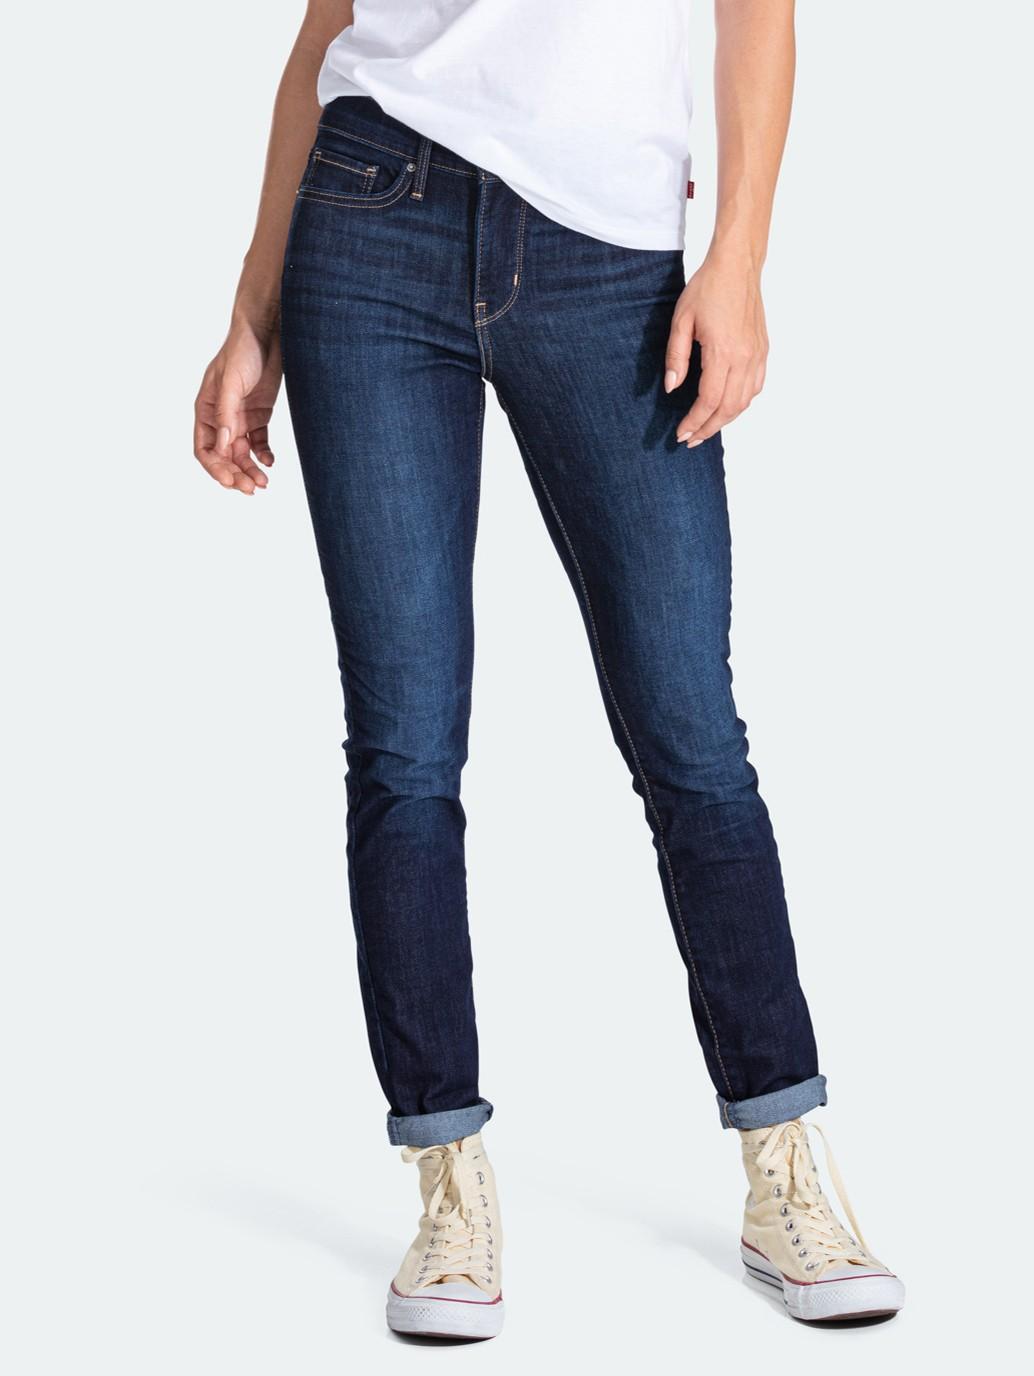 Buy 311 Shaping Skinny Jeans Levi S Official Online Store Sg